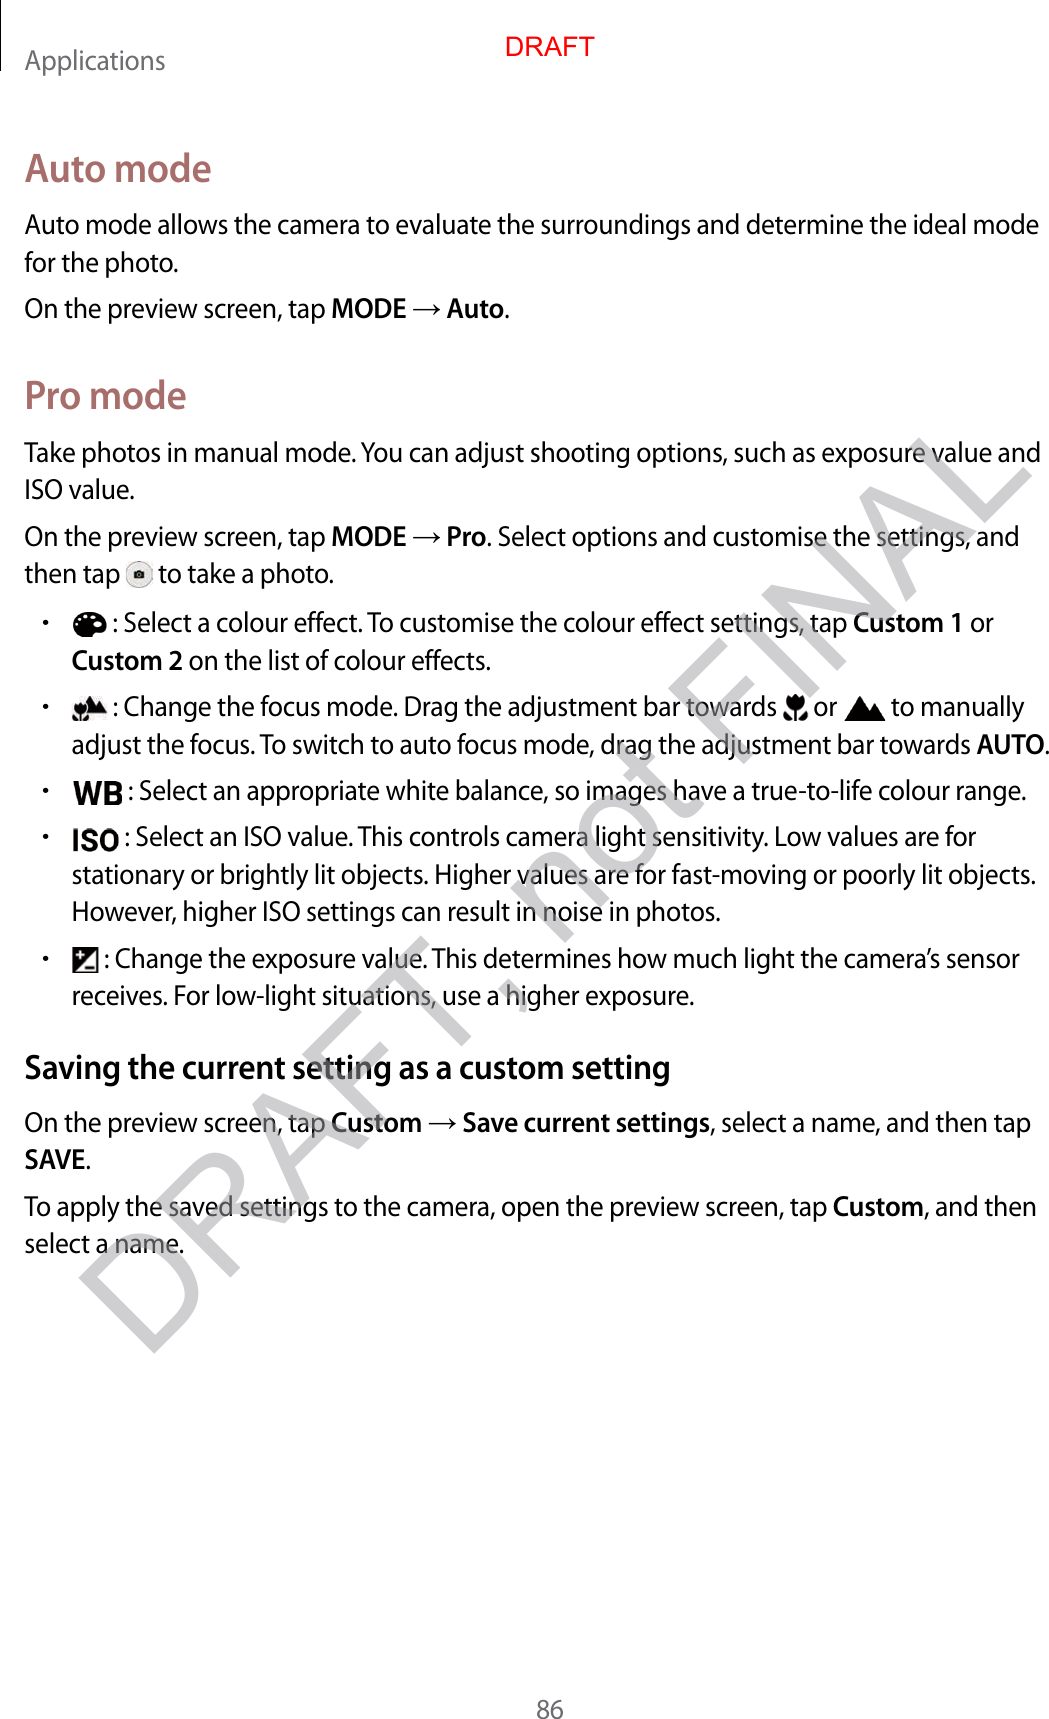 Applications86A uto modeAut o mode allow s the camera t o evalua te the surr oundings and det ermine the ideal mode for the phot o.On the preview scr een, tap MODE  Auto.Pr o modeTake photos in manual mode. You can adjust shooting options, such as exposure v alue and ISO value.On the preview scr een, tap MODE  Pro. Select options and customise the settings , and then tap   to take a photo .•: Select a colour eff ect. To customise the colour effect settings, tap Cust om 1 orCust om 2 on the list of colour eff ects.•: Change the focus mode . Dr ag the adjustment bar t ow ar ds   or  to manually adjust the focus . To switch to auto focus mode , dr ag the adjustment bar t o war ds AUTO.•: Select an appropriat e white balanc e , so images ha v e a true-to-life c olour range .•: Select an ISO value . T his con tr ols camera ligh t sensitivity. Lo w values ar e forstationary or brightly lit objects. Higher values are f or fast-mo ving or poorly lit objects. Howev er, higher ISO settings can result in noise in photos .•: Change the exposure value. This determines how much light the camera’s sensorreceives . For low -light situations, use a higher exposure.Saving the curren t setting as a custom settingOn the preview scr een, tap Custom  Save curr en t settings, select a name, and then tap SAVE.To apply the sav ed settings to the camer a, open the pr eview scr een, tap Custom, and then select a name.DRAFTDRAFT, not FINAL